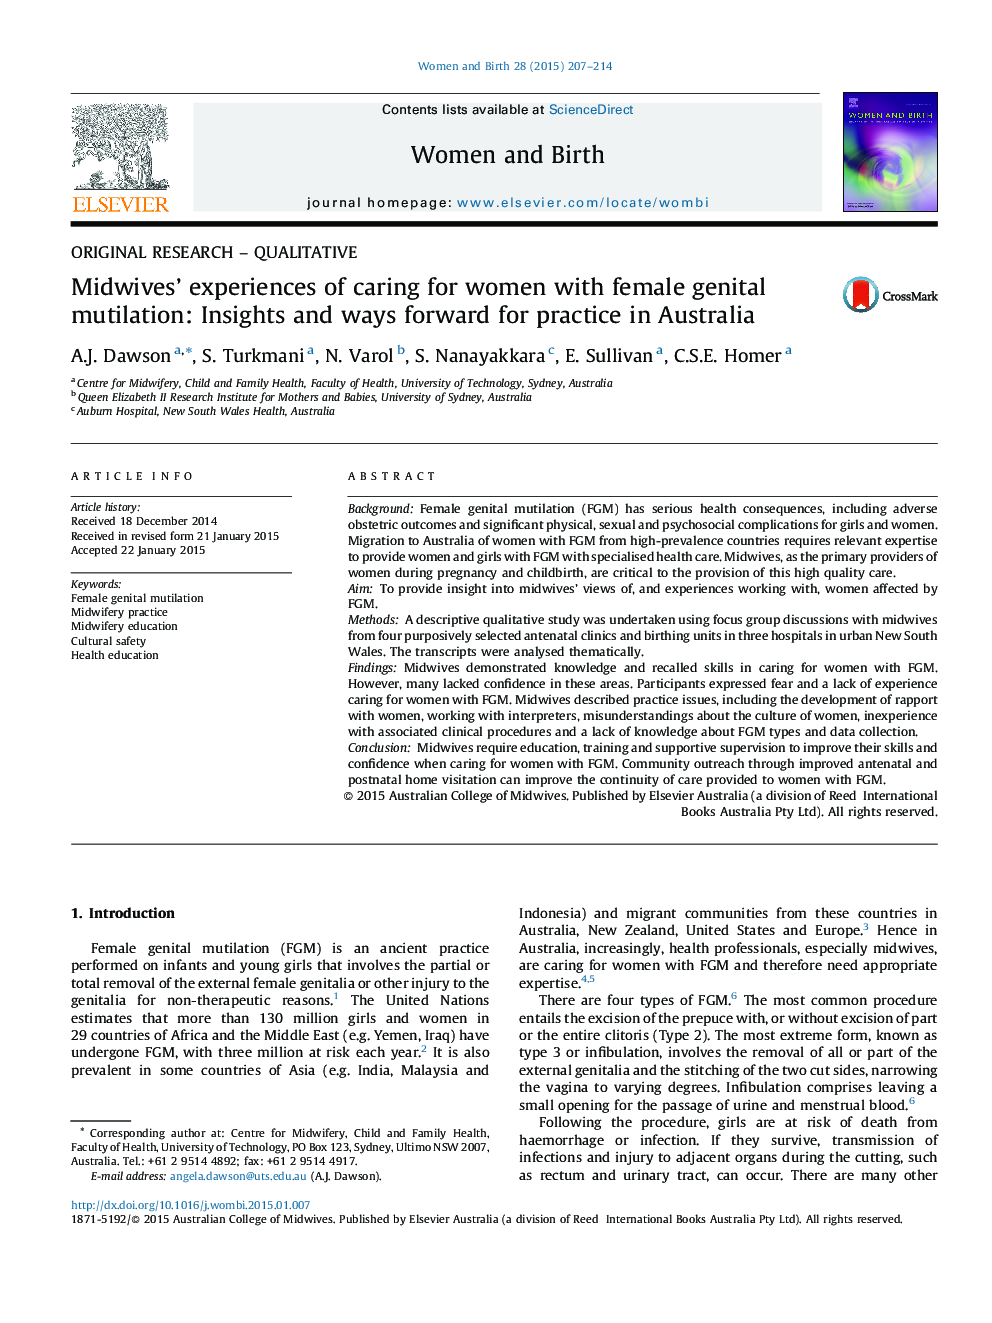 ORIGINAL RESEARCH - QUALITATIVEMidwives' experiences of caring for women with female genital mutilation: Insights and ways forward for practice in Australia